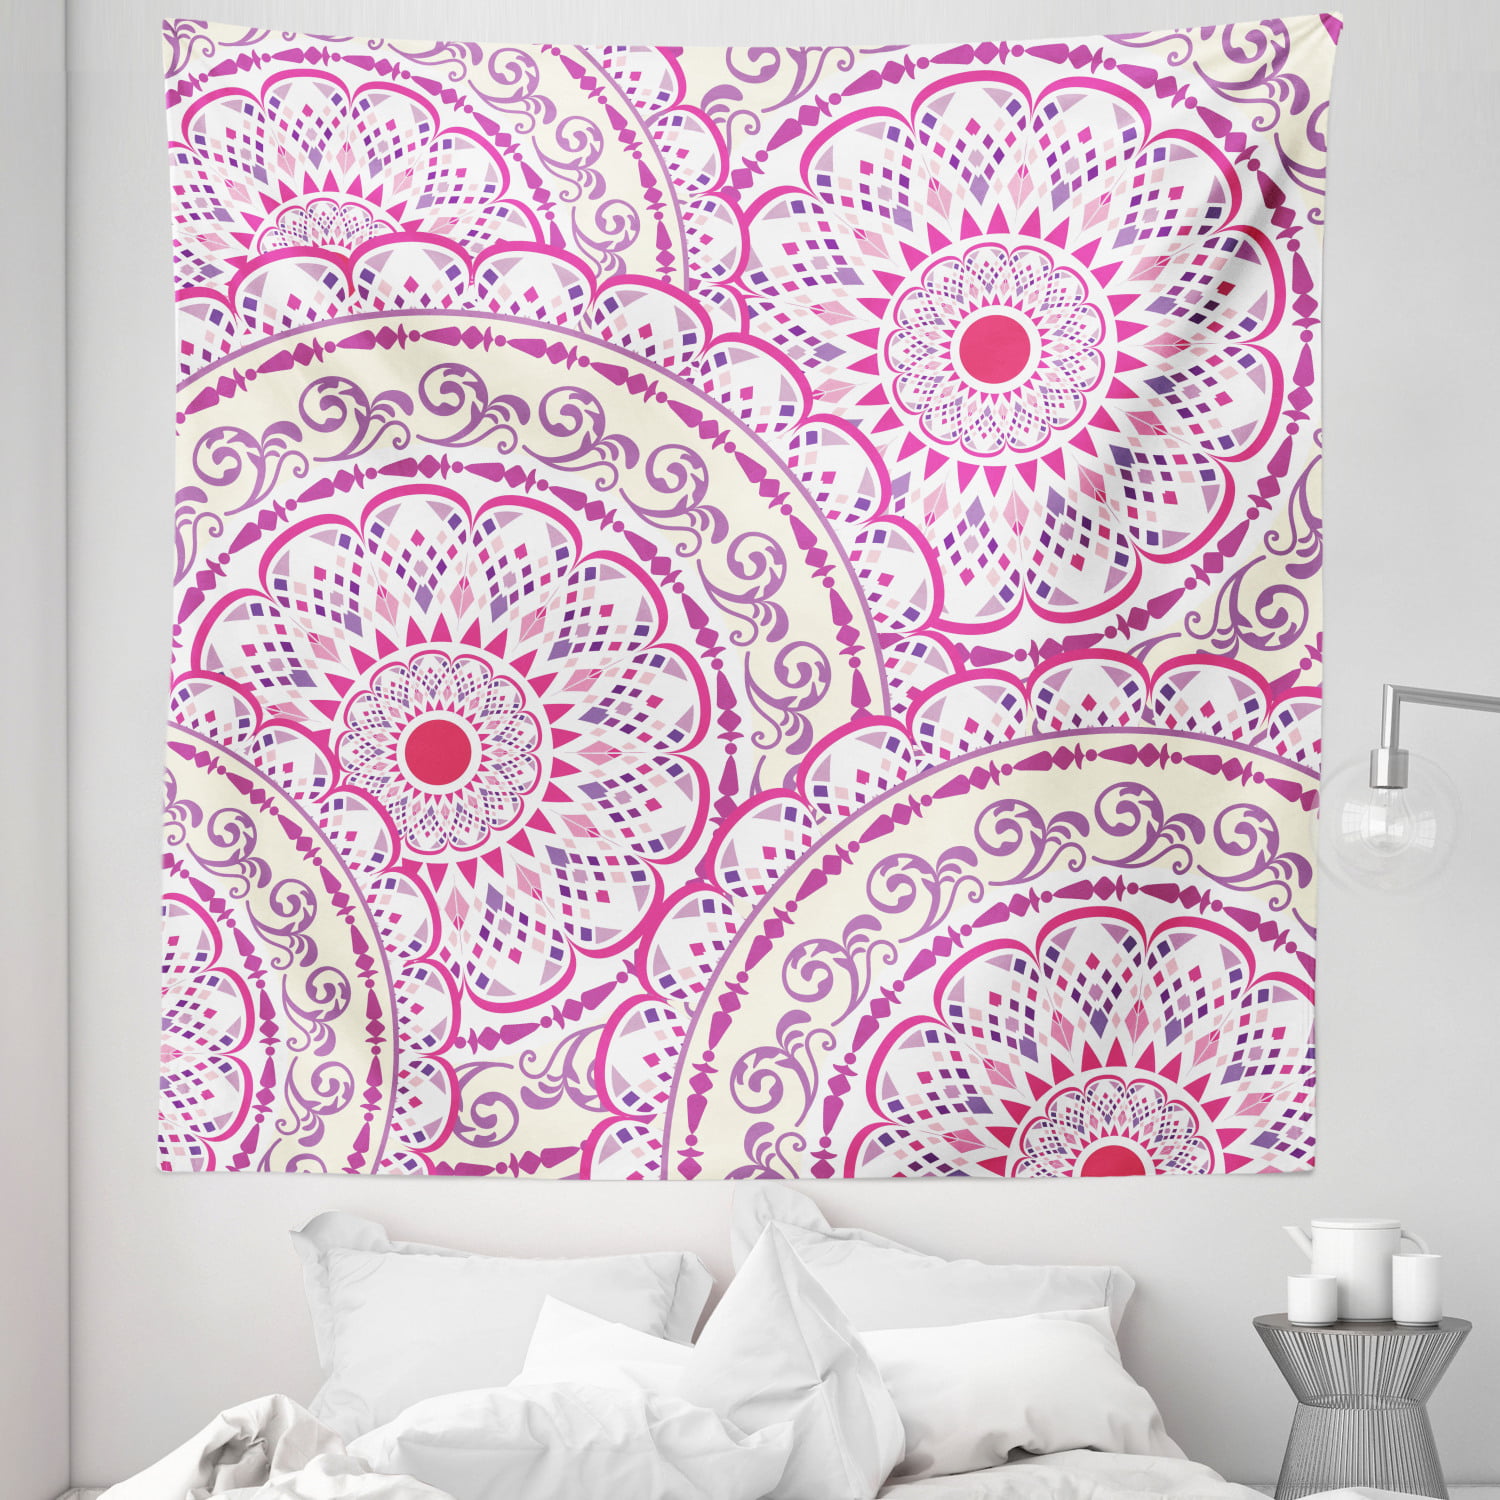 Small to Giant Sizes Printed in the USA Black and White Mandala Tapestry Wall Hanging Floral Tapestries Dorm Room Bedroom Decor Art 